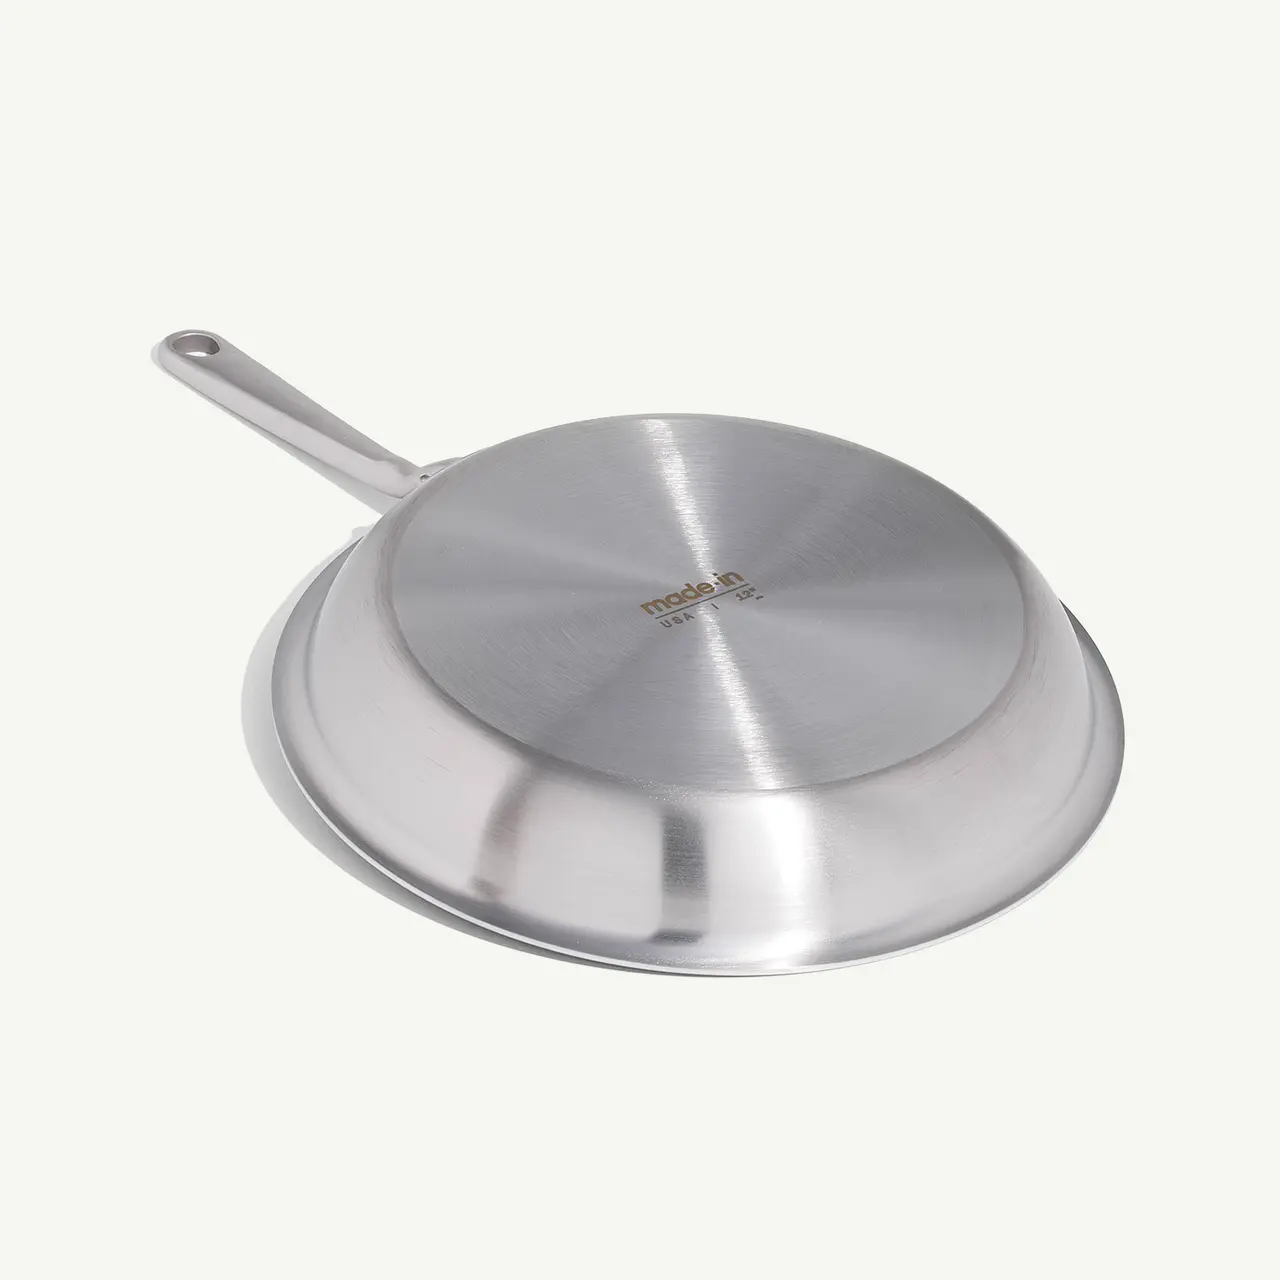 A stainless steel frying pan with a long handle and a flat, fitted lid, set on a light background.